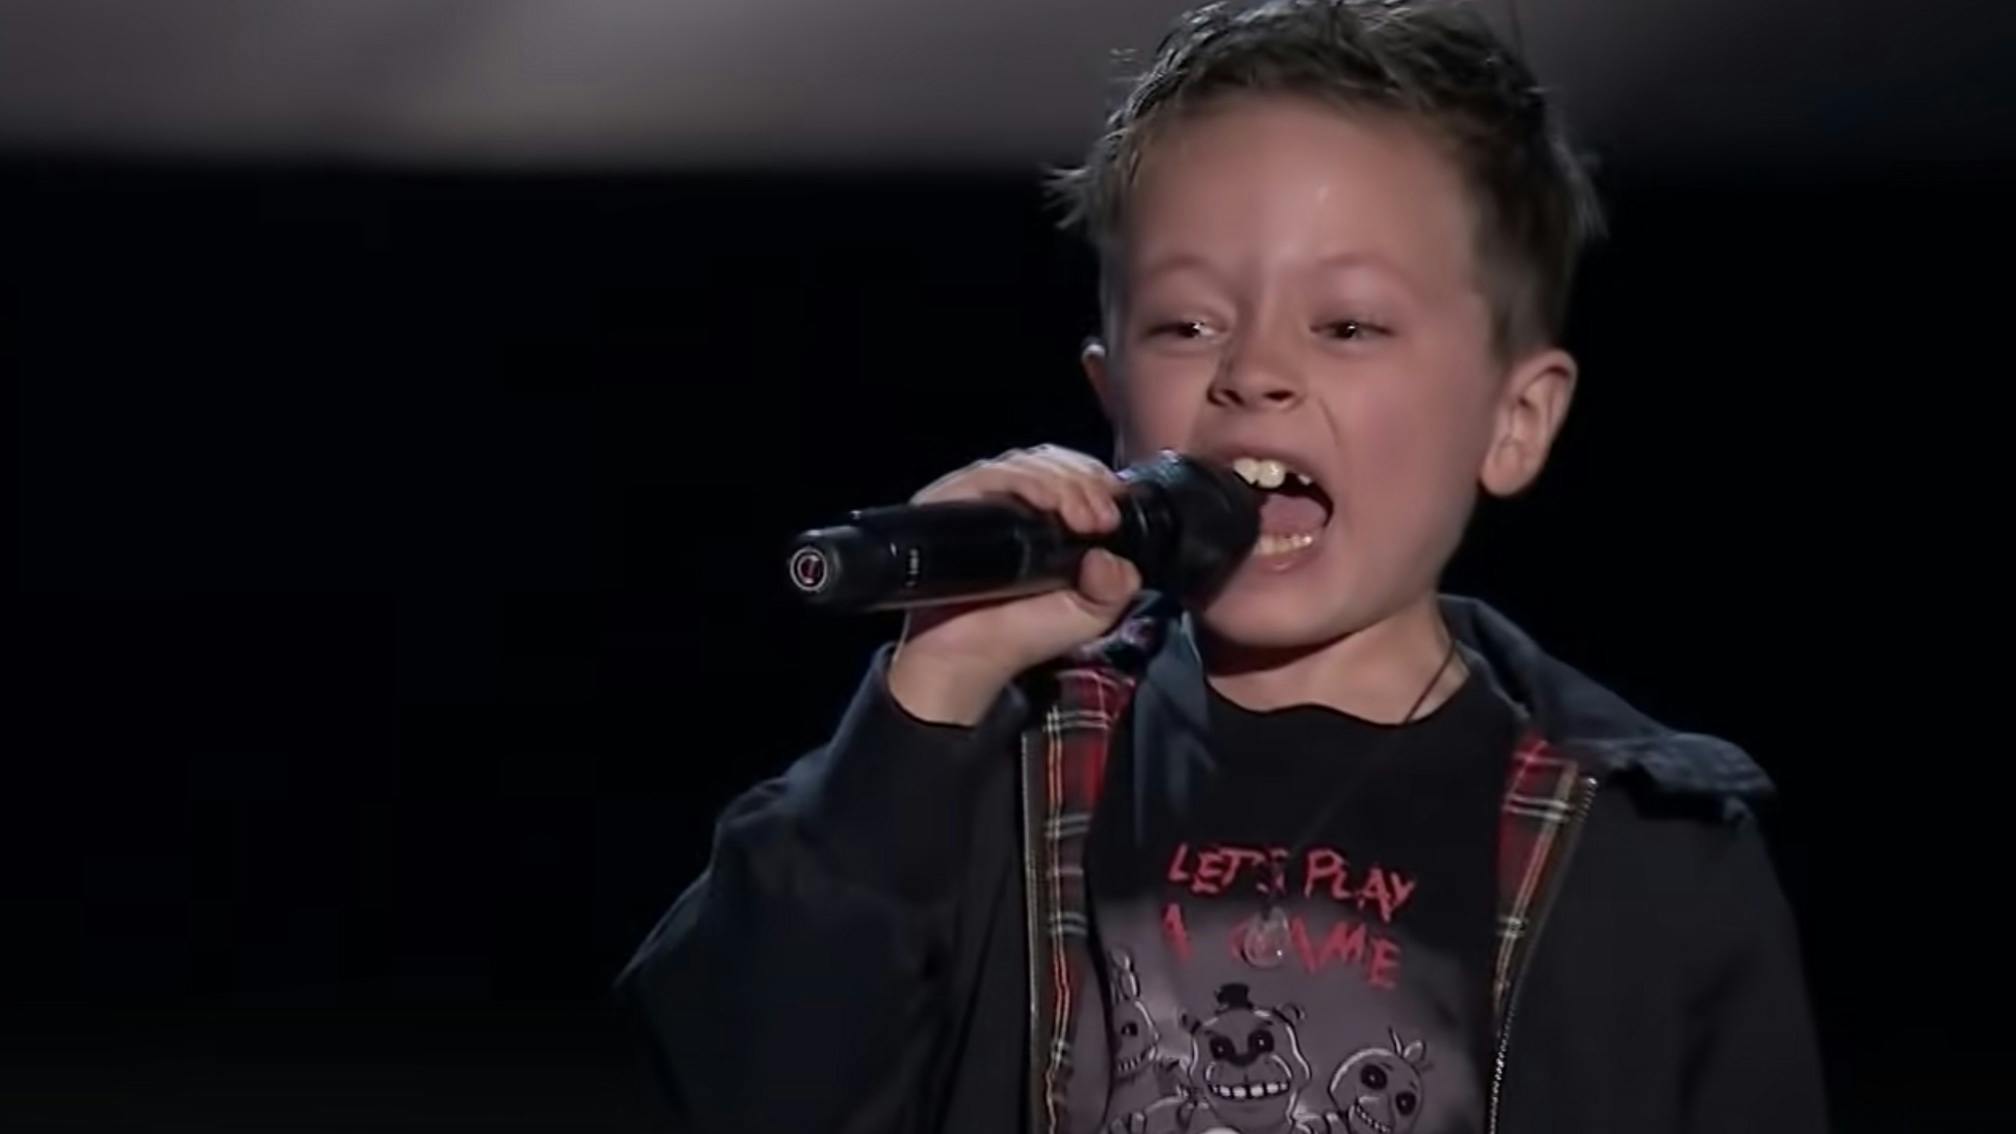 Awesome seven-year-old crushes AC/DC's Highway To Hell on Spain's The Voice Kids